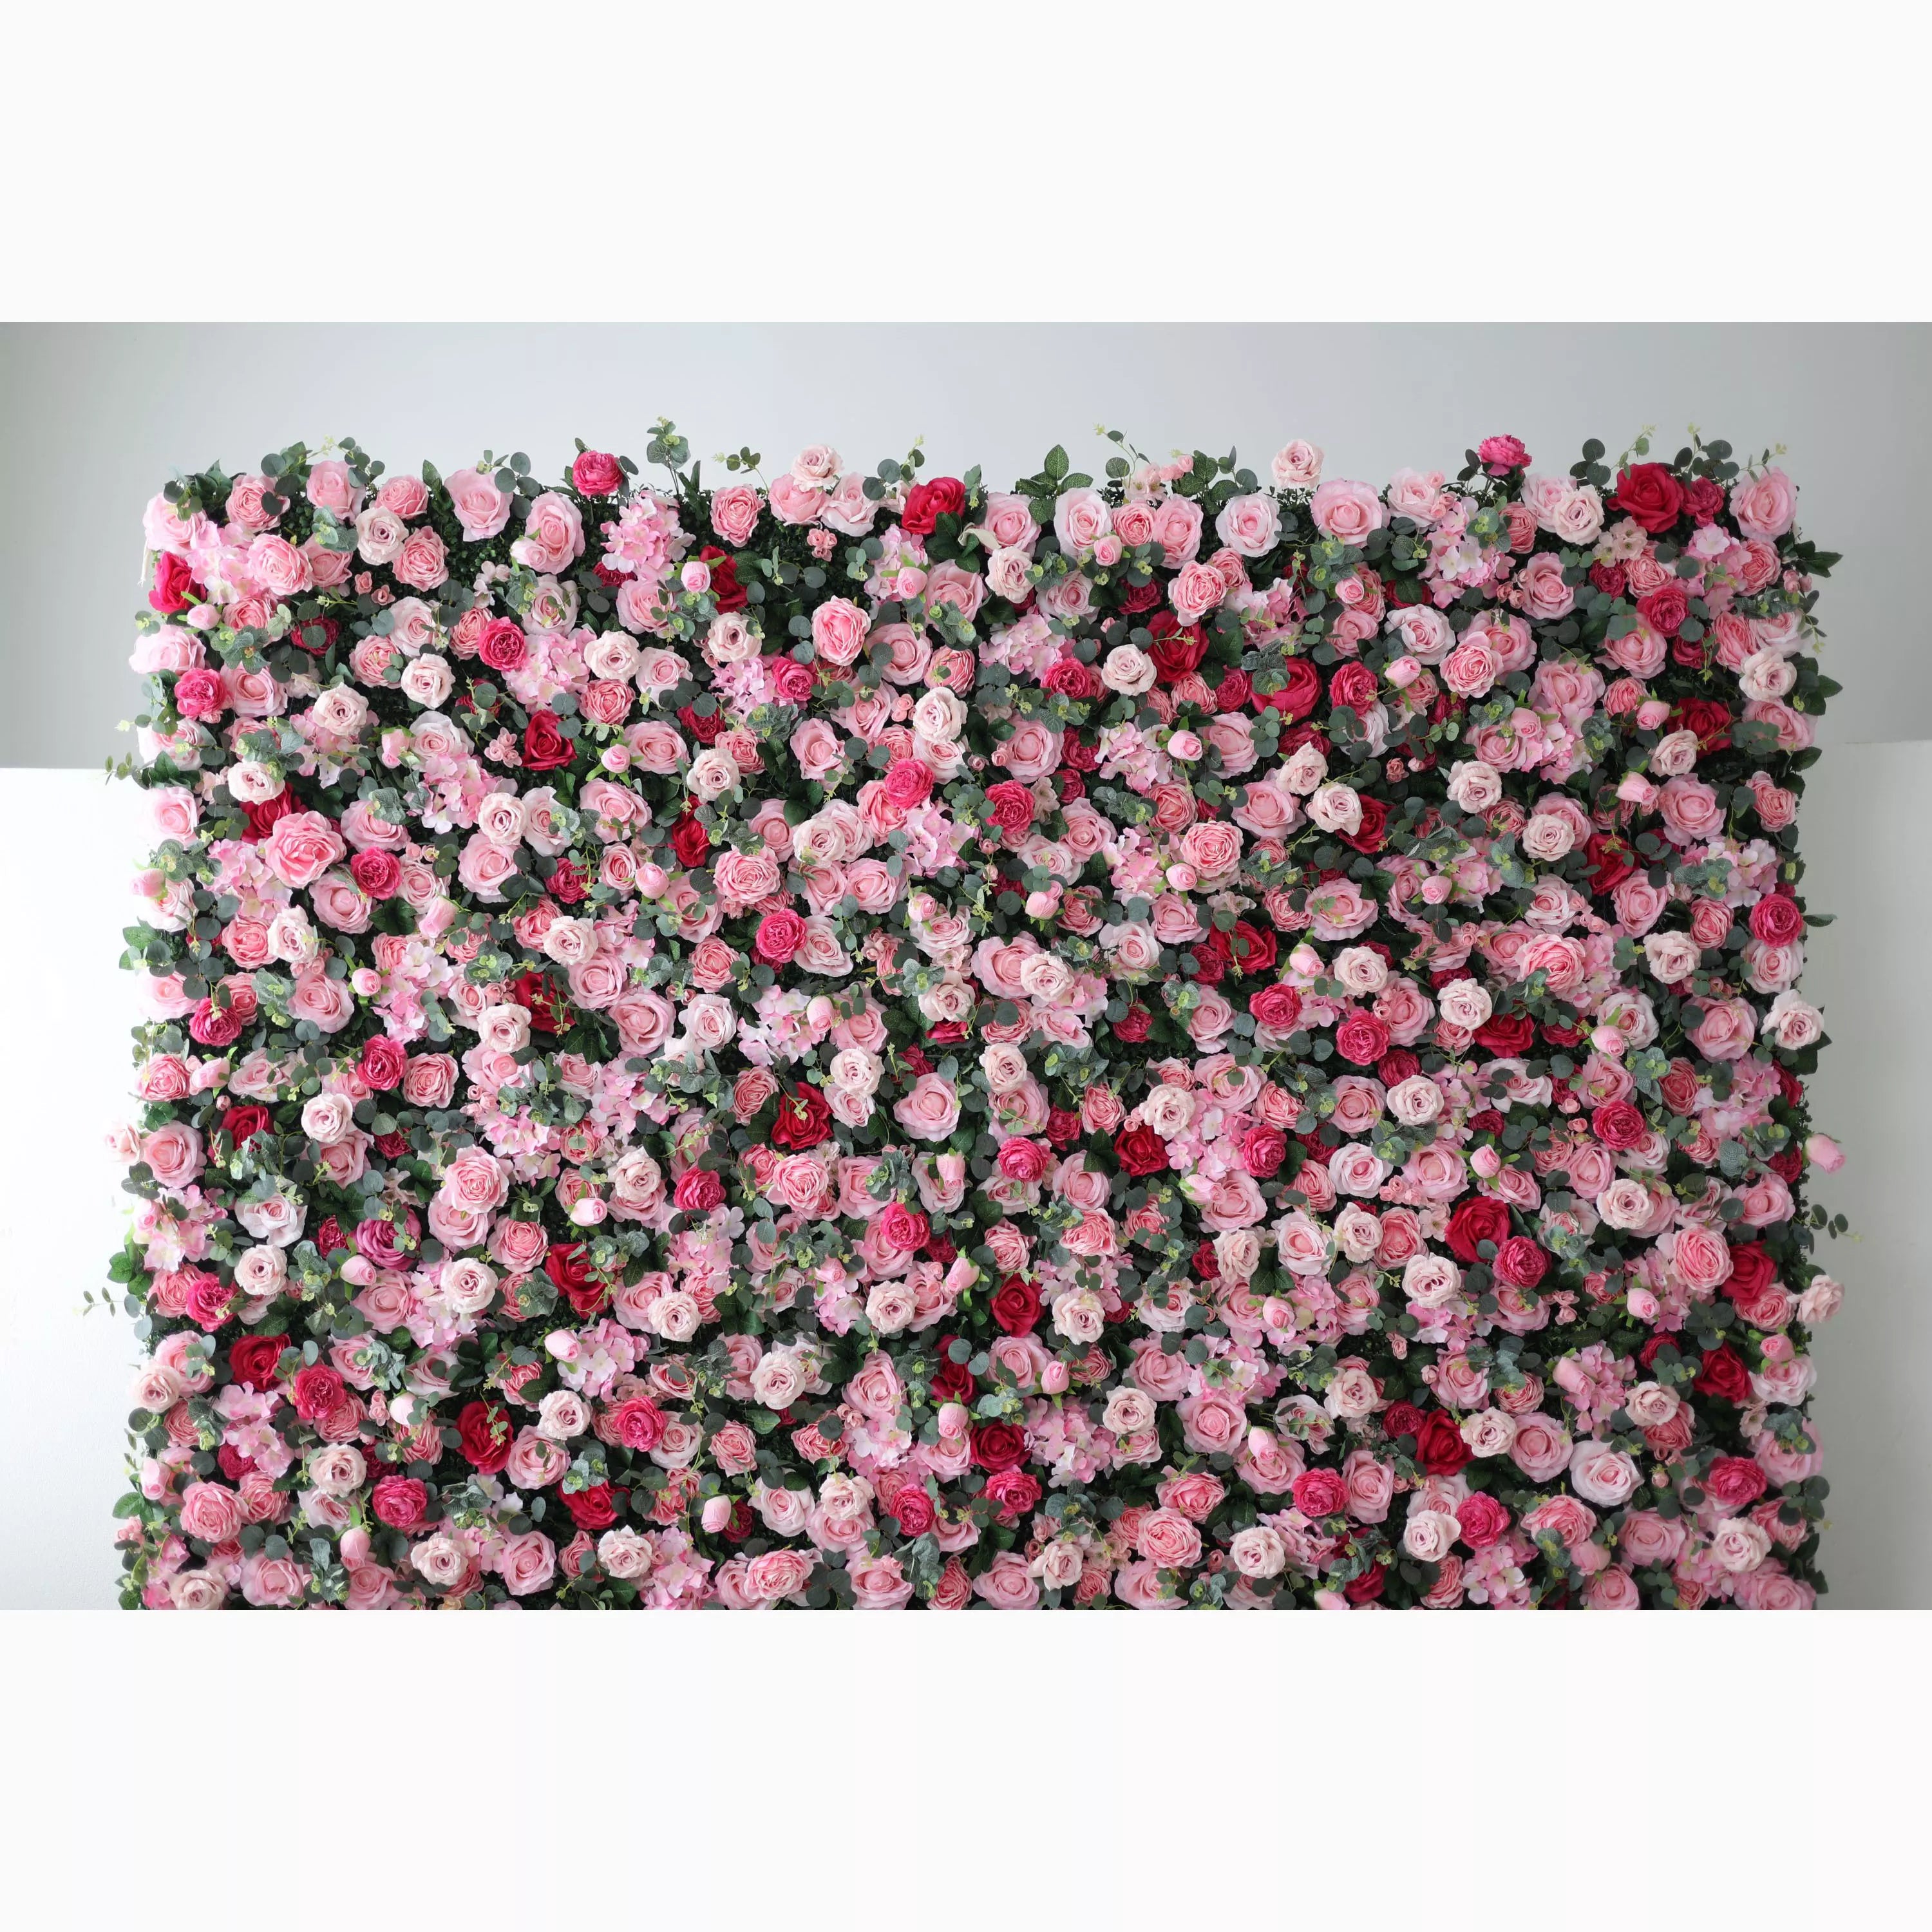 Valar Flowers Presents: Blooming Bliss Artificial Fabric Flower Wall – Lush Pink, Red, and White Rose Display for Weddings, Events, and Home Décor – Ultimate Floral Backdrop for Romantic Ambiances-VF-214